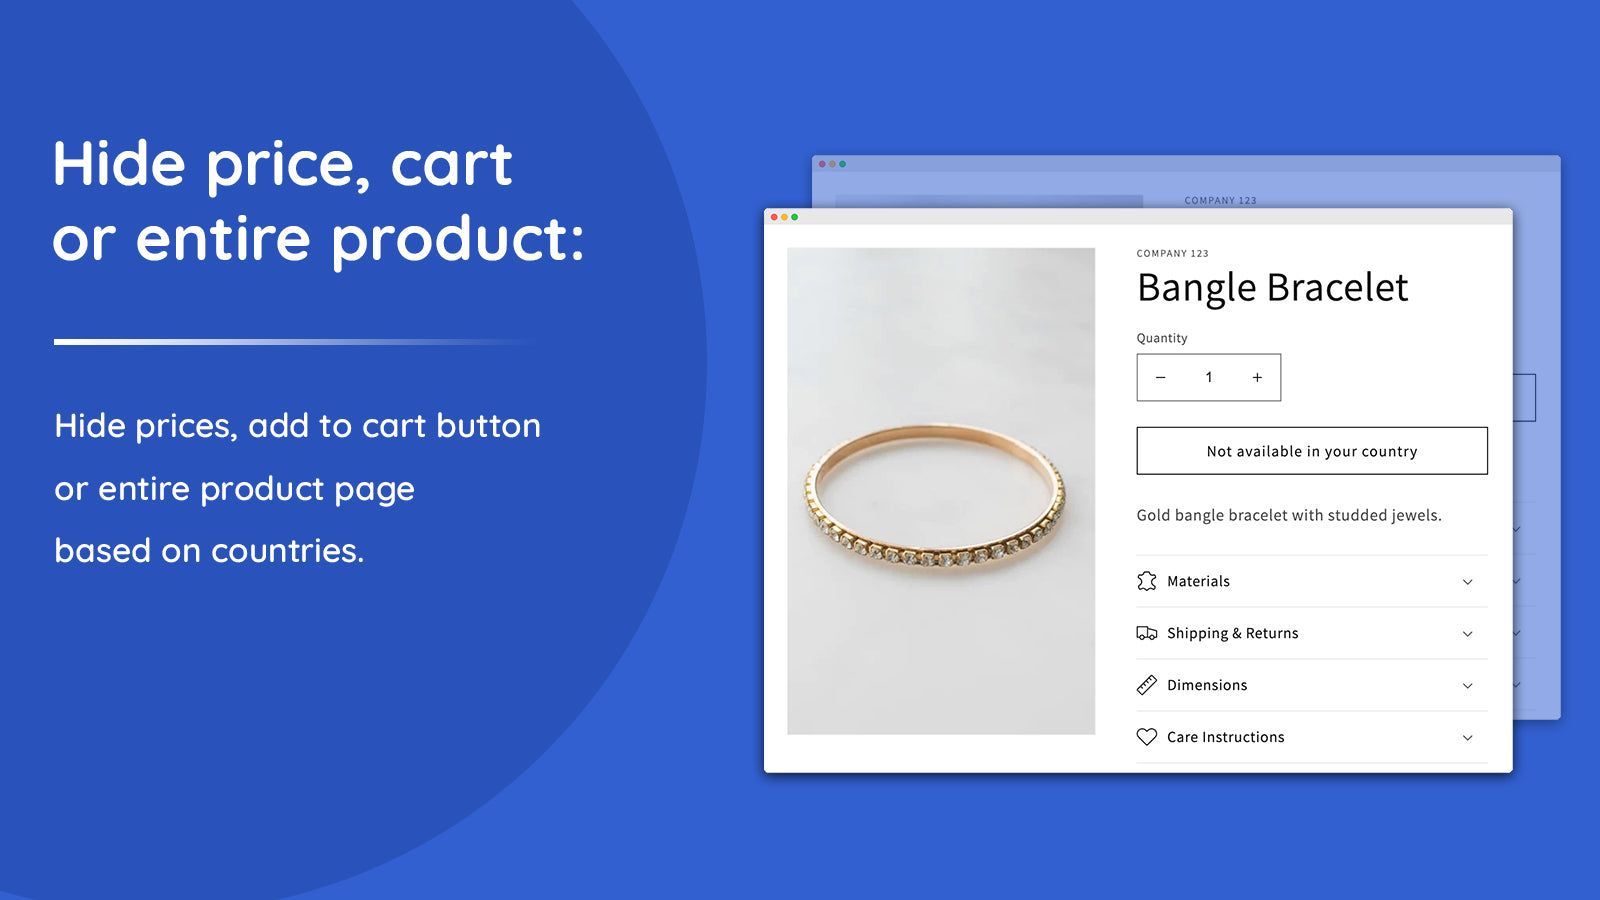 Hide price, cart or entire product by country